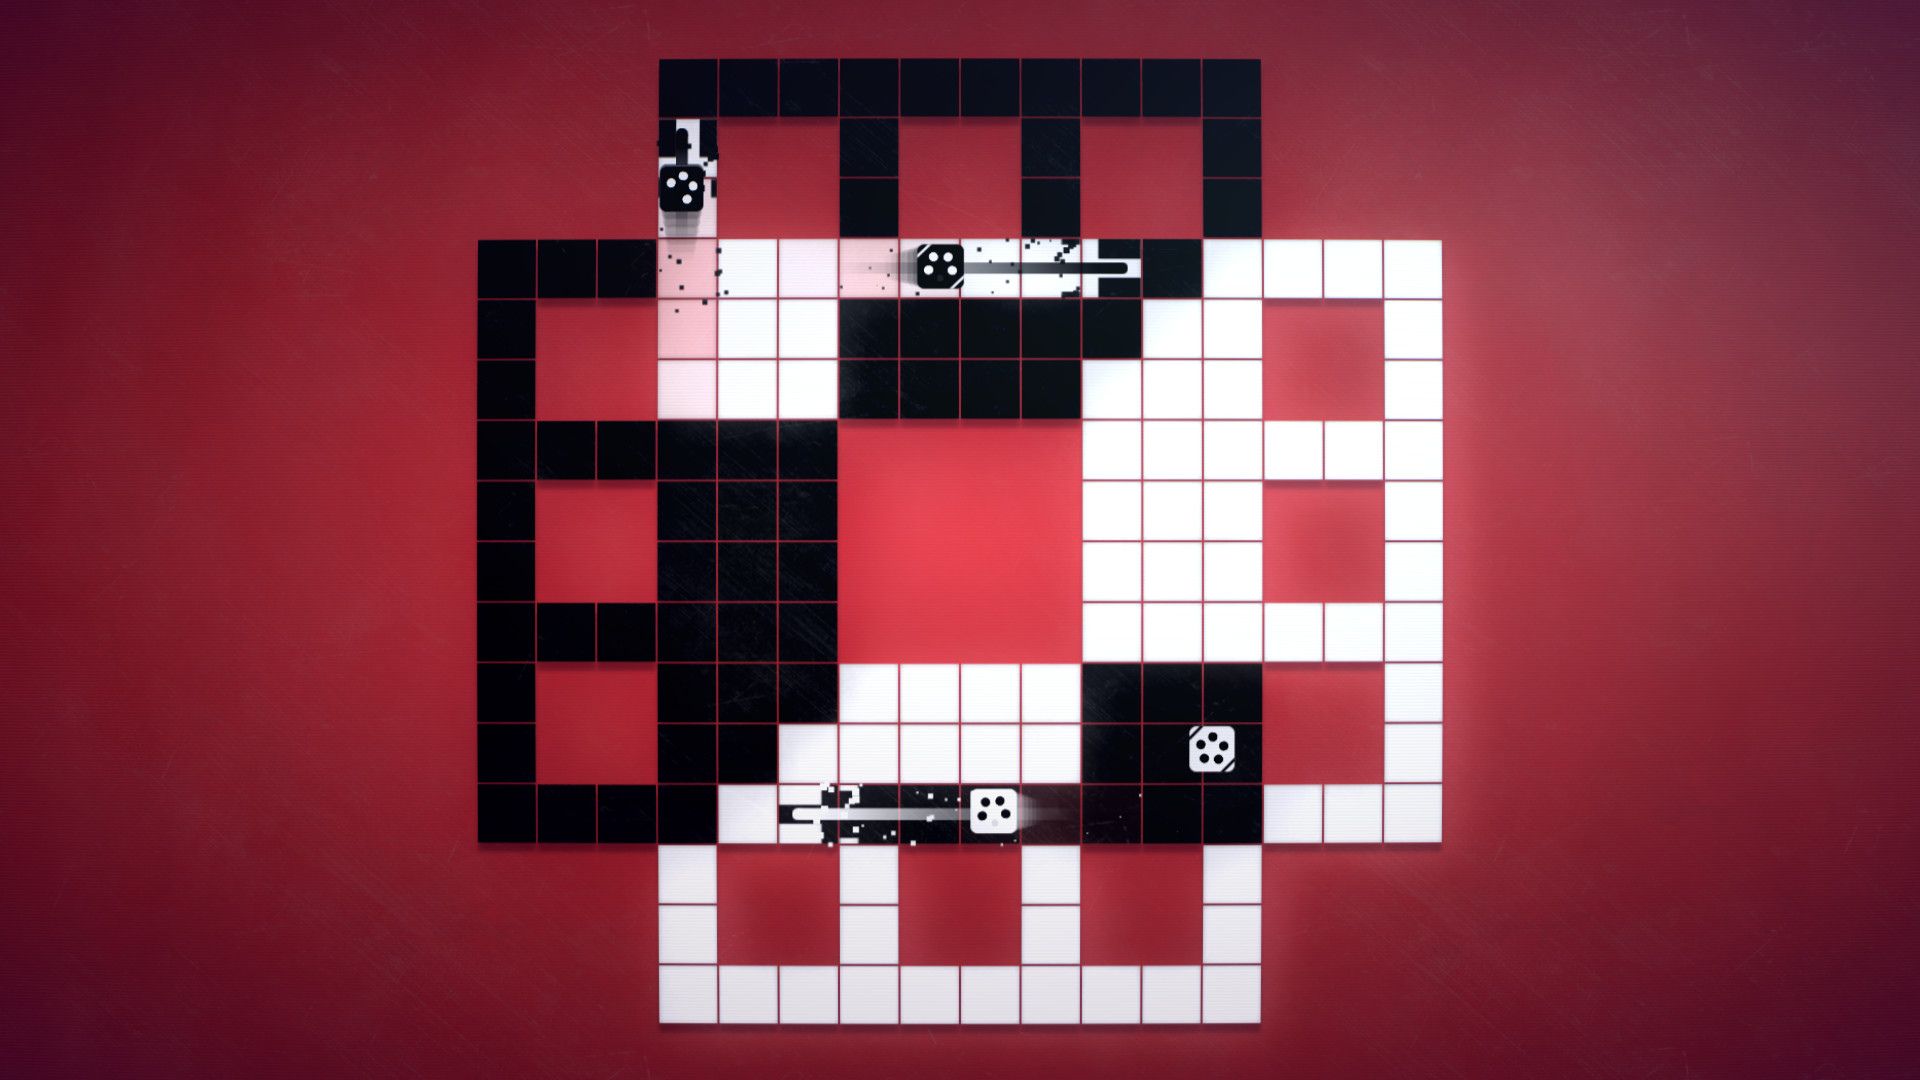 Inversus Deluxe is one of the best offline games for 4 players.